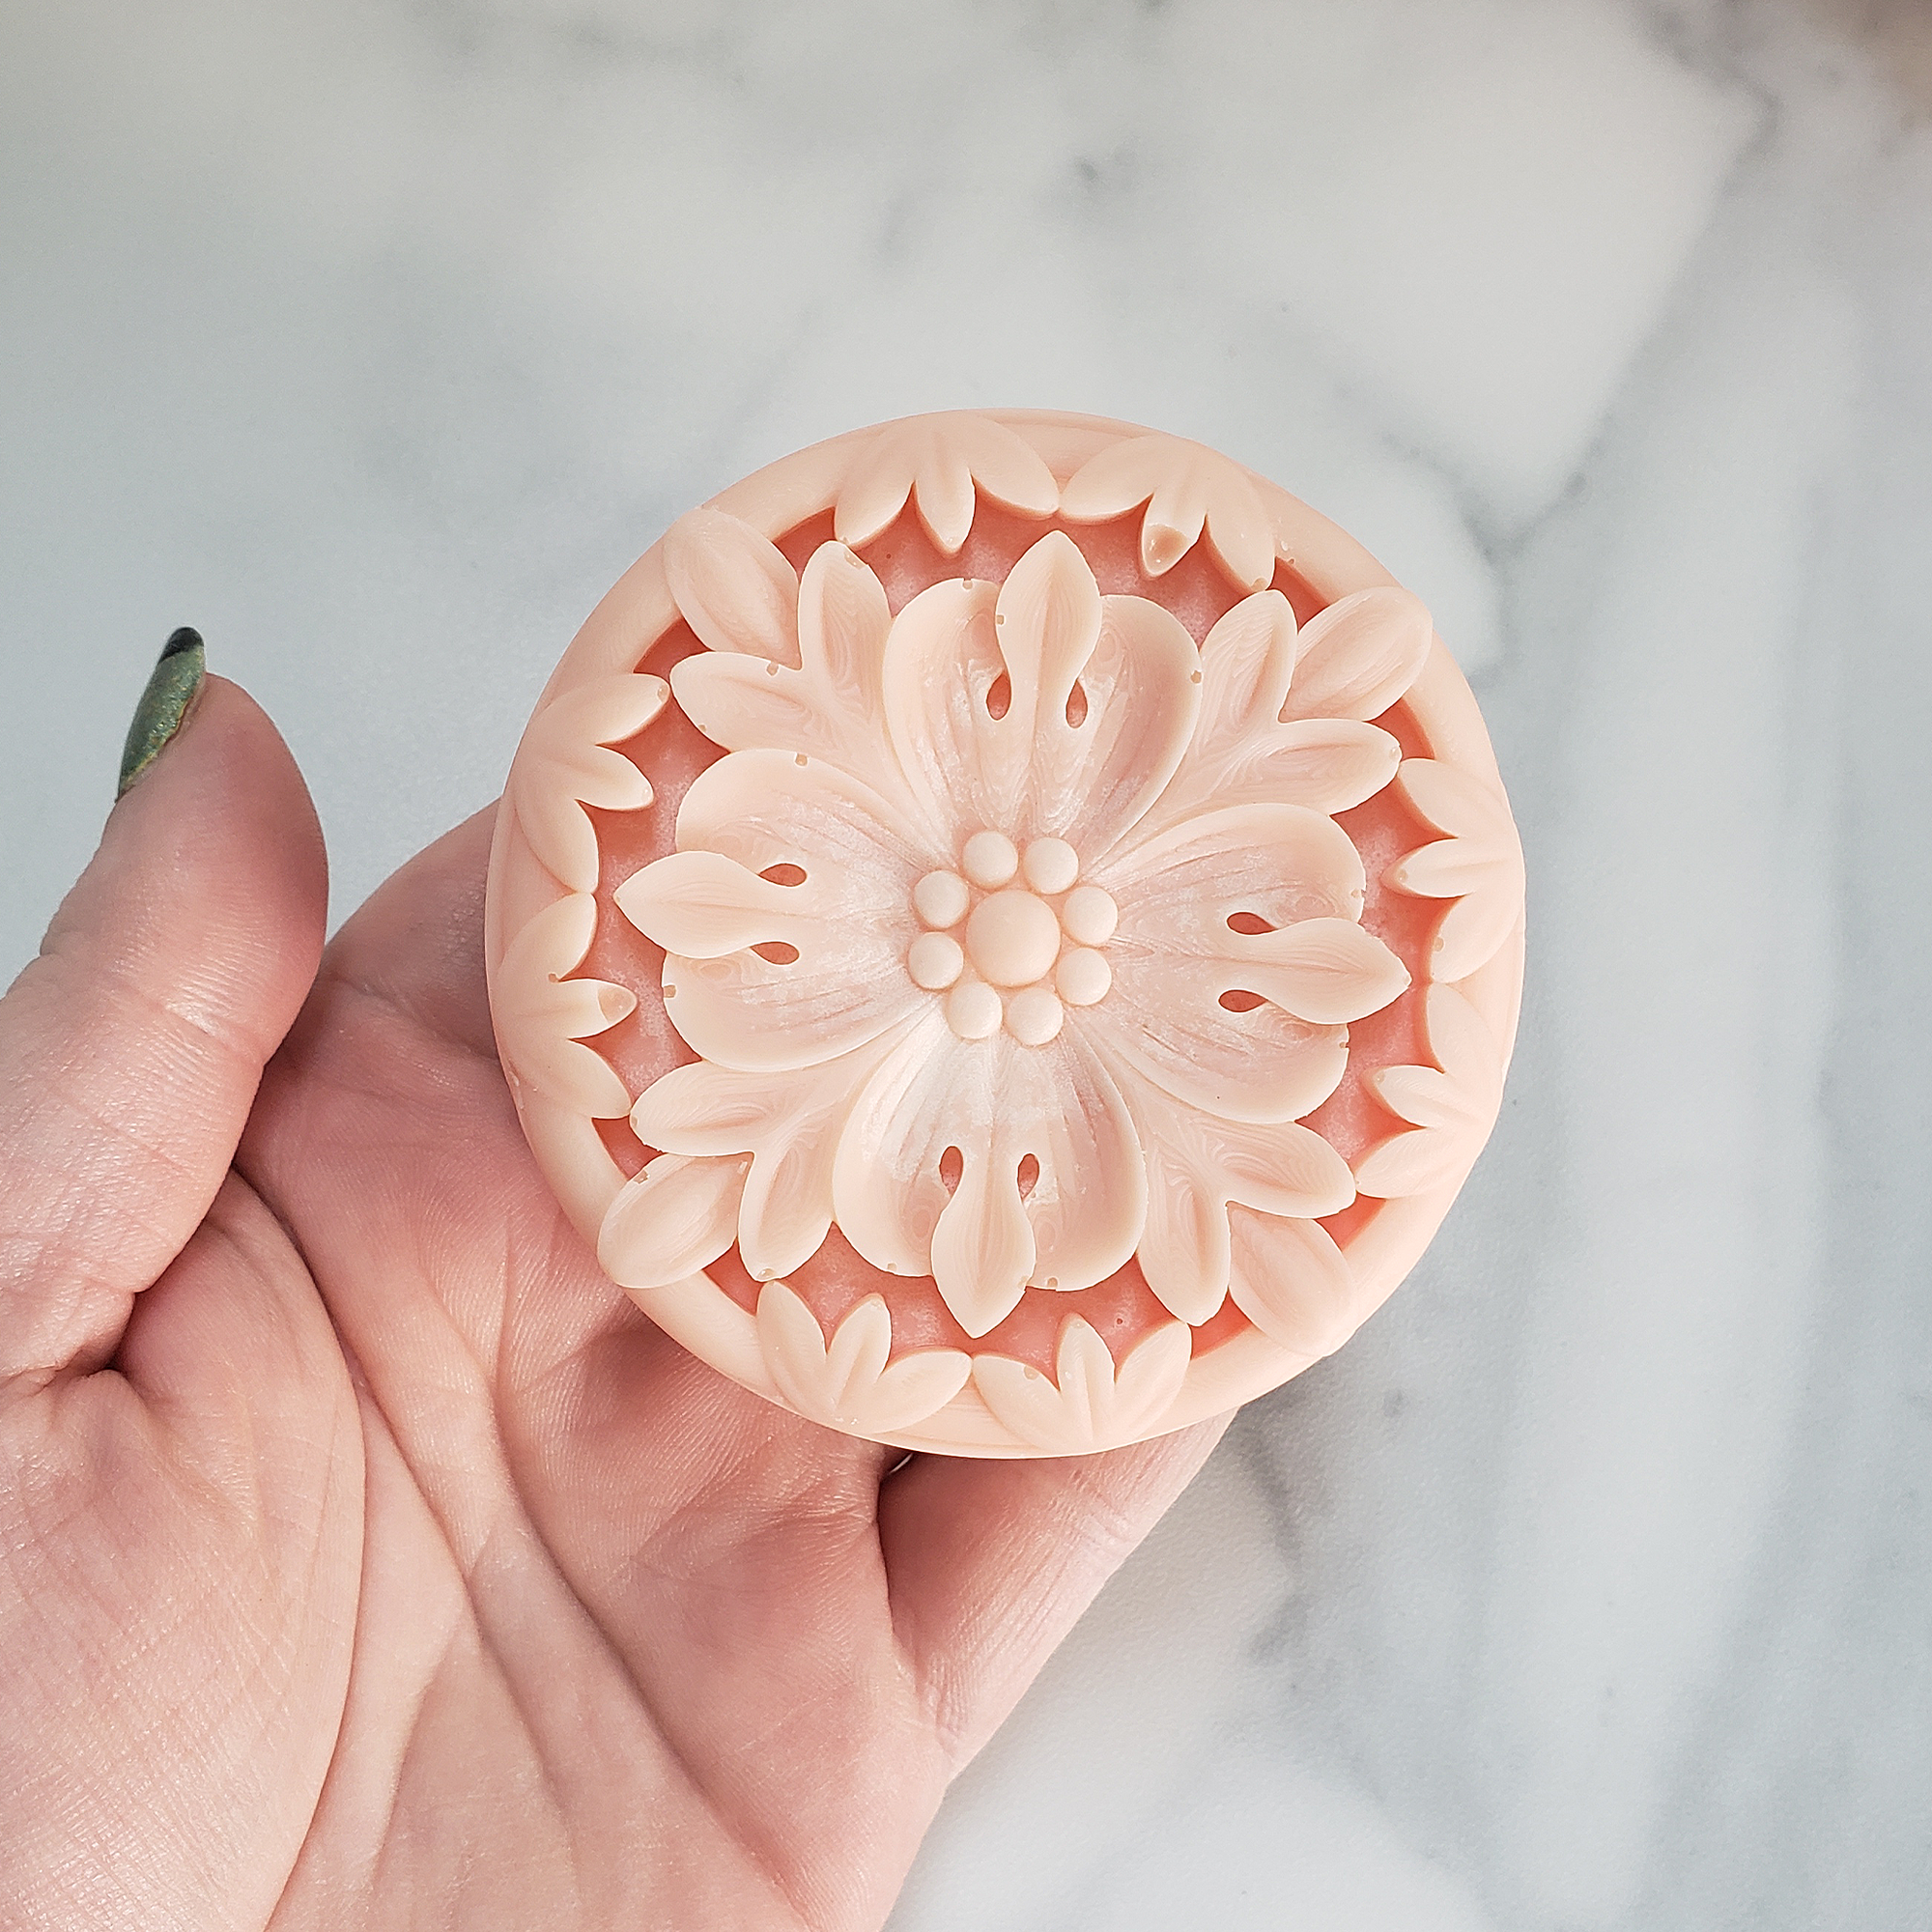 Honeysuckle Scented Wax Melt | Coconut Soy Wax Melt Cake for Aromatherapy